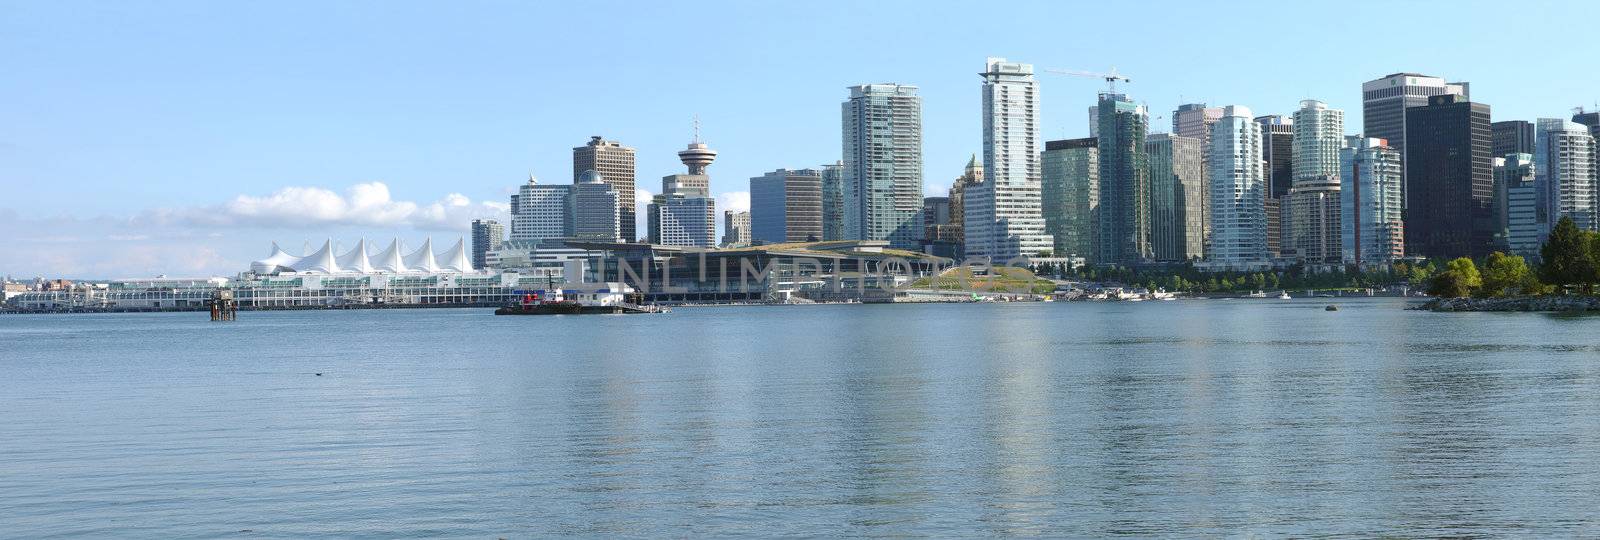 The Vancouver BC skyline waterfront & Canada Place panorama.